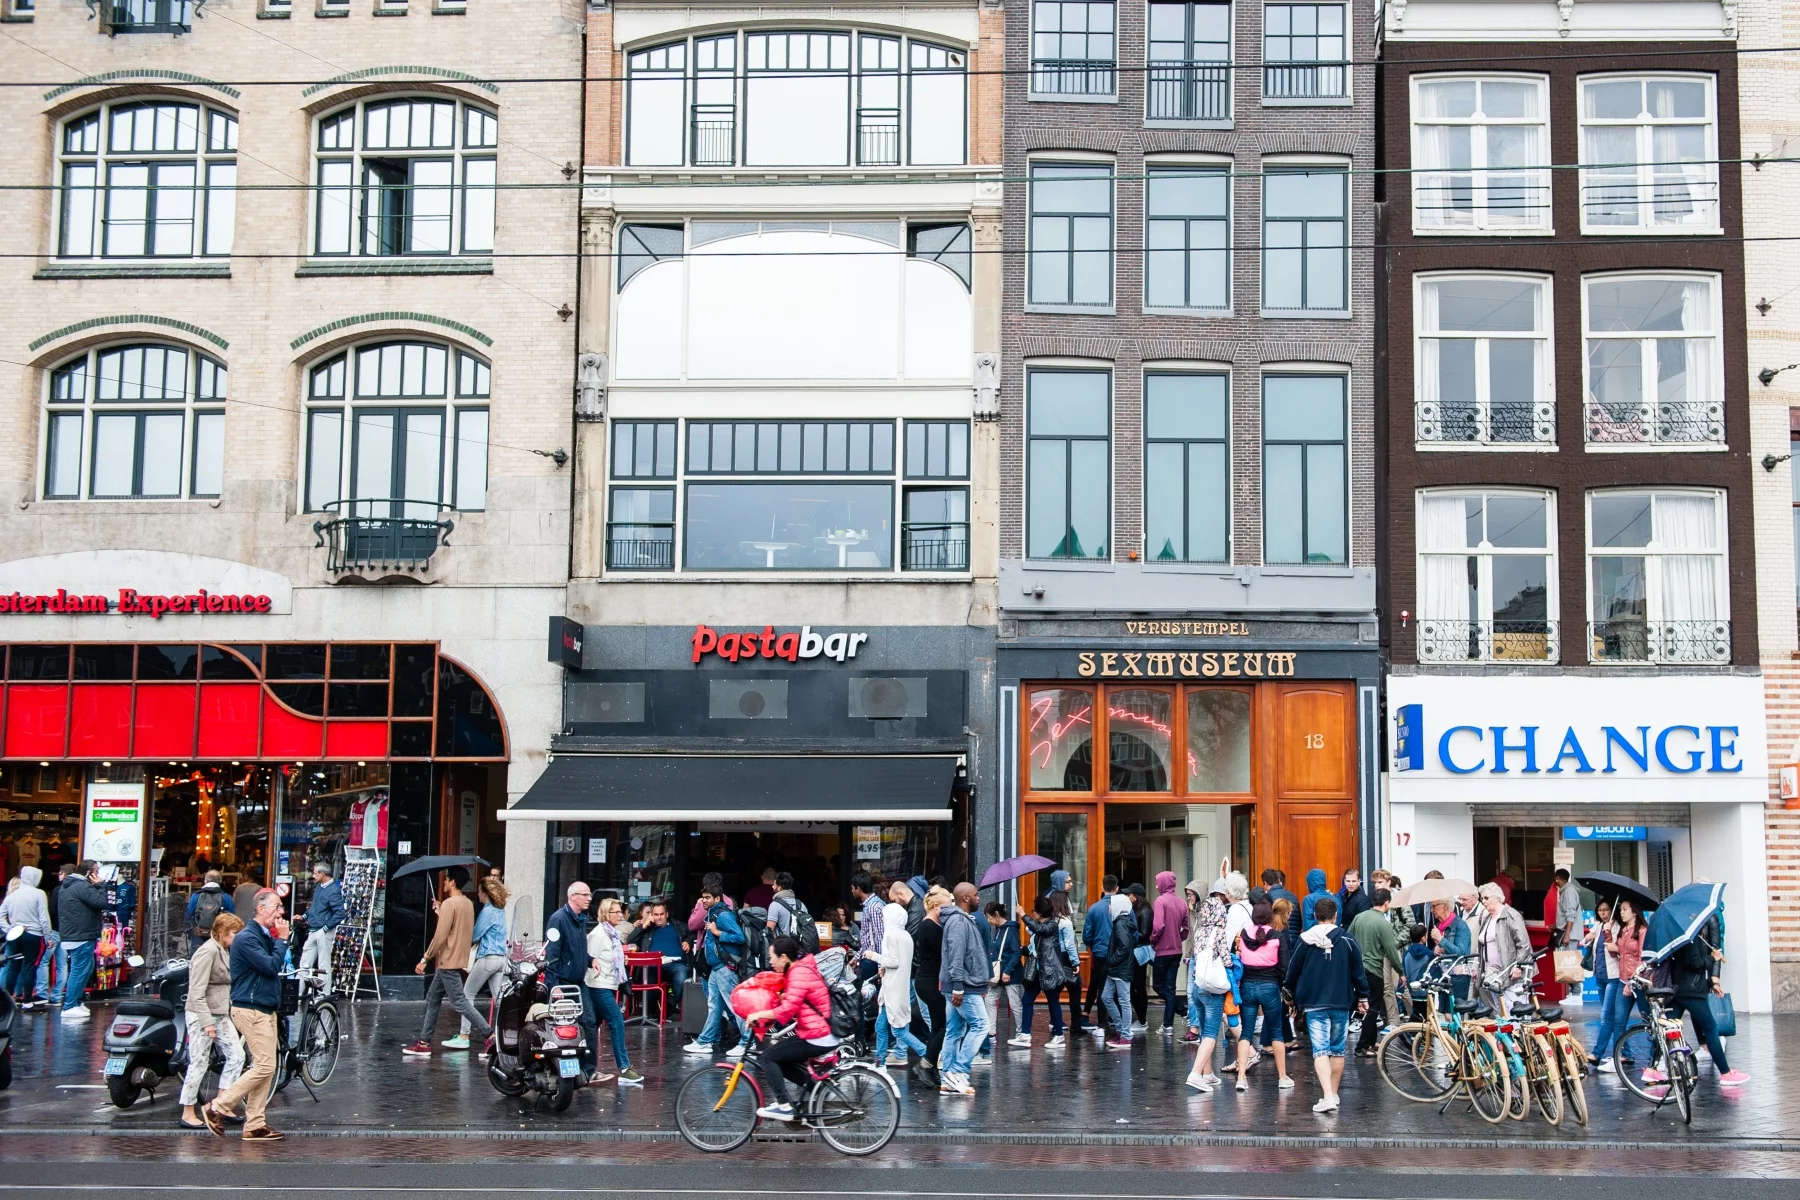 Crowds walking on the pavement in Amsterdam city center on a rainy day